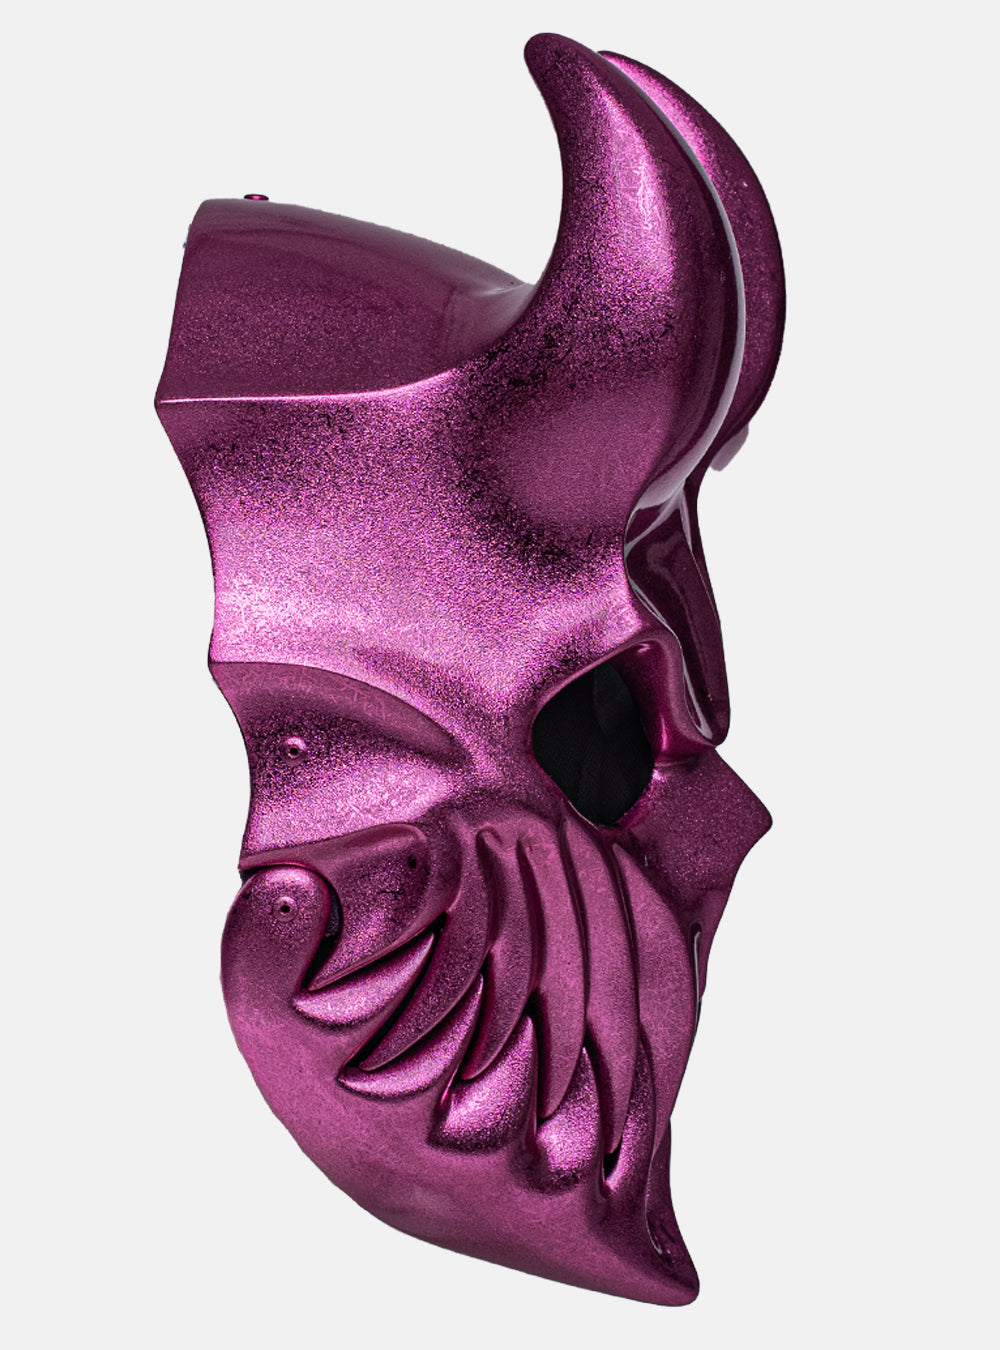 (SLAUGHTER TO PREVAIL) ALEX TERRIBLE MASK “KID OF DARKNESS” (PINK)